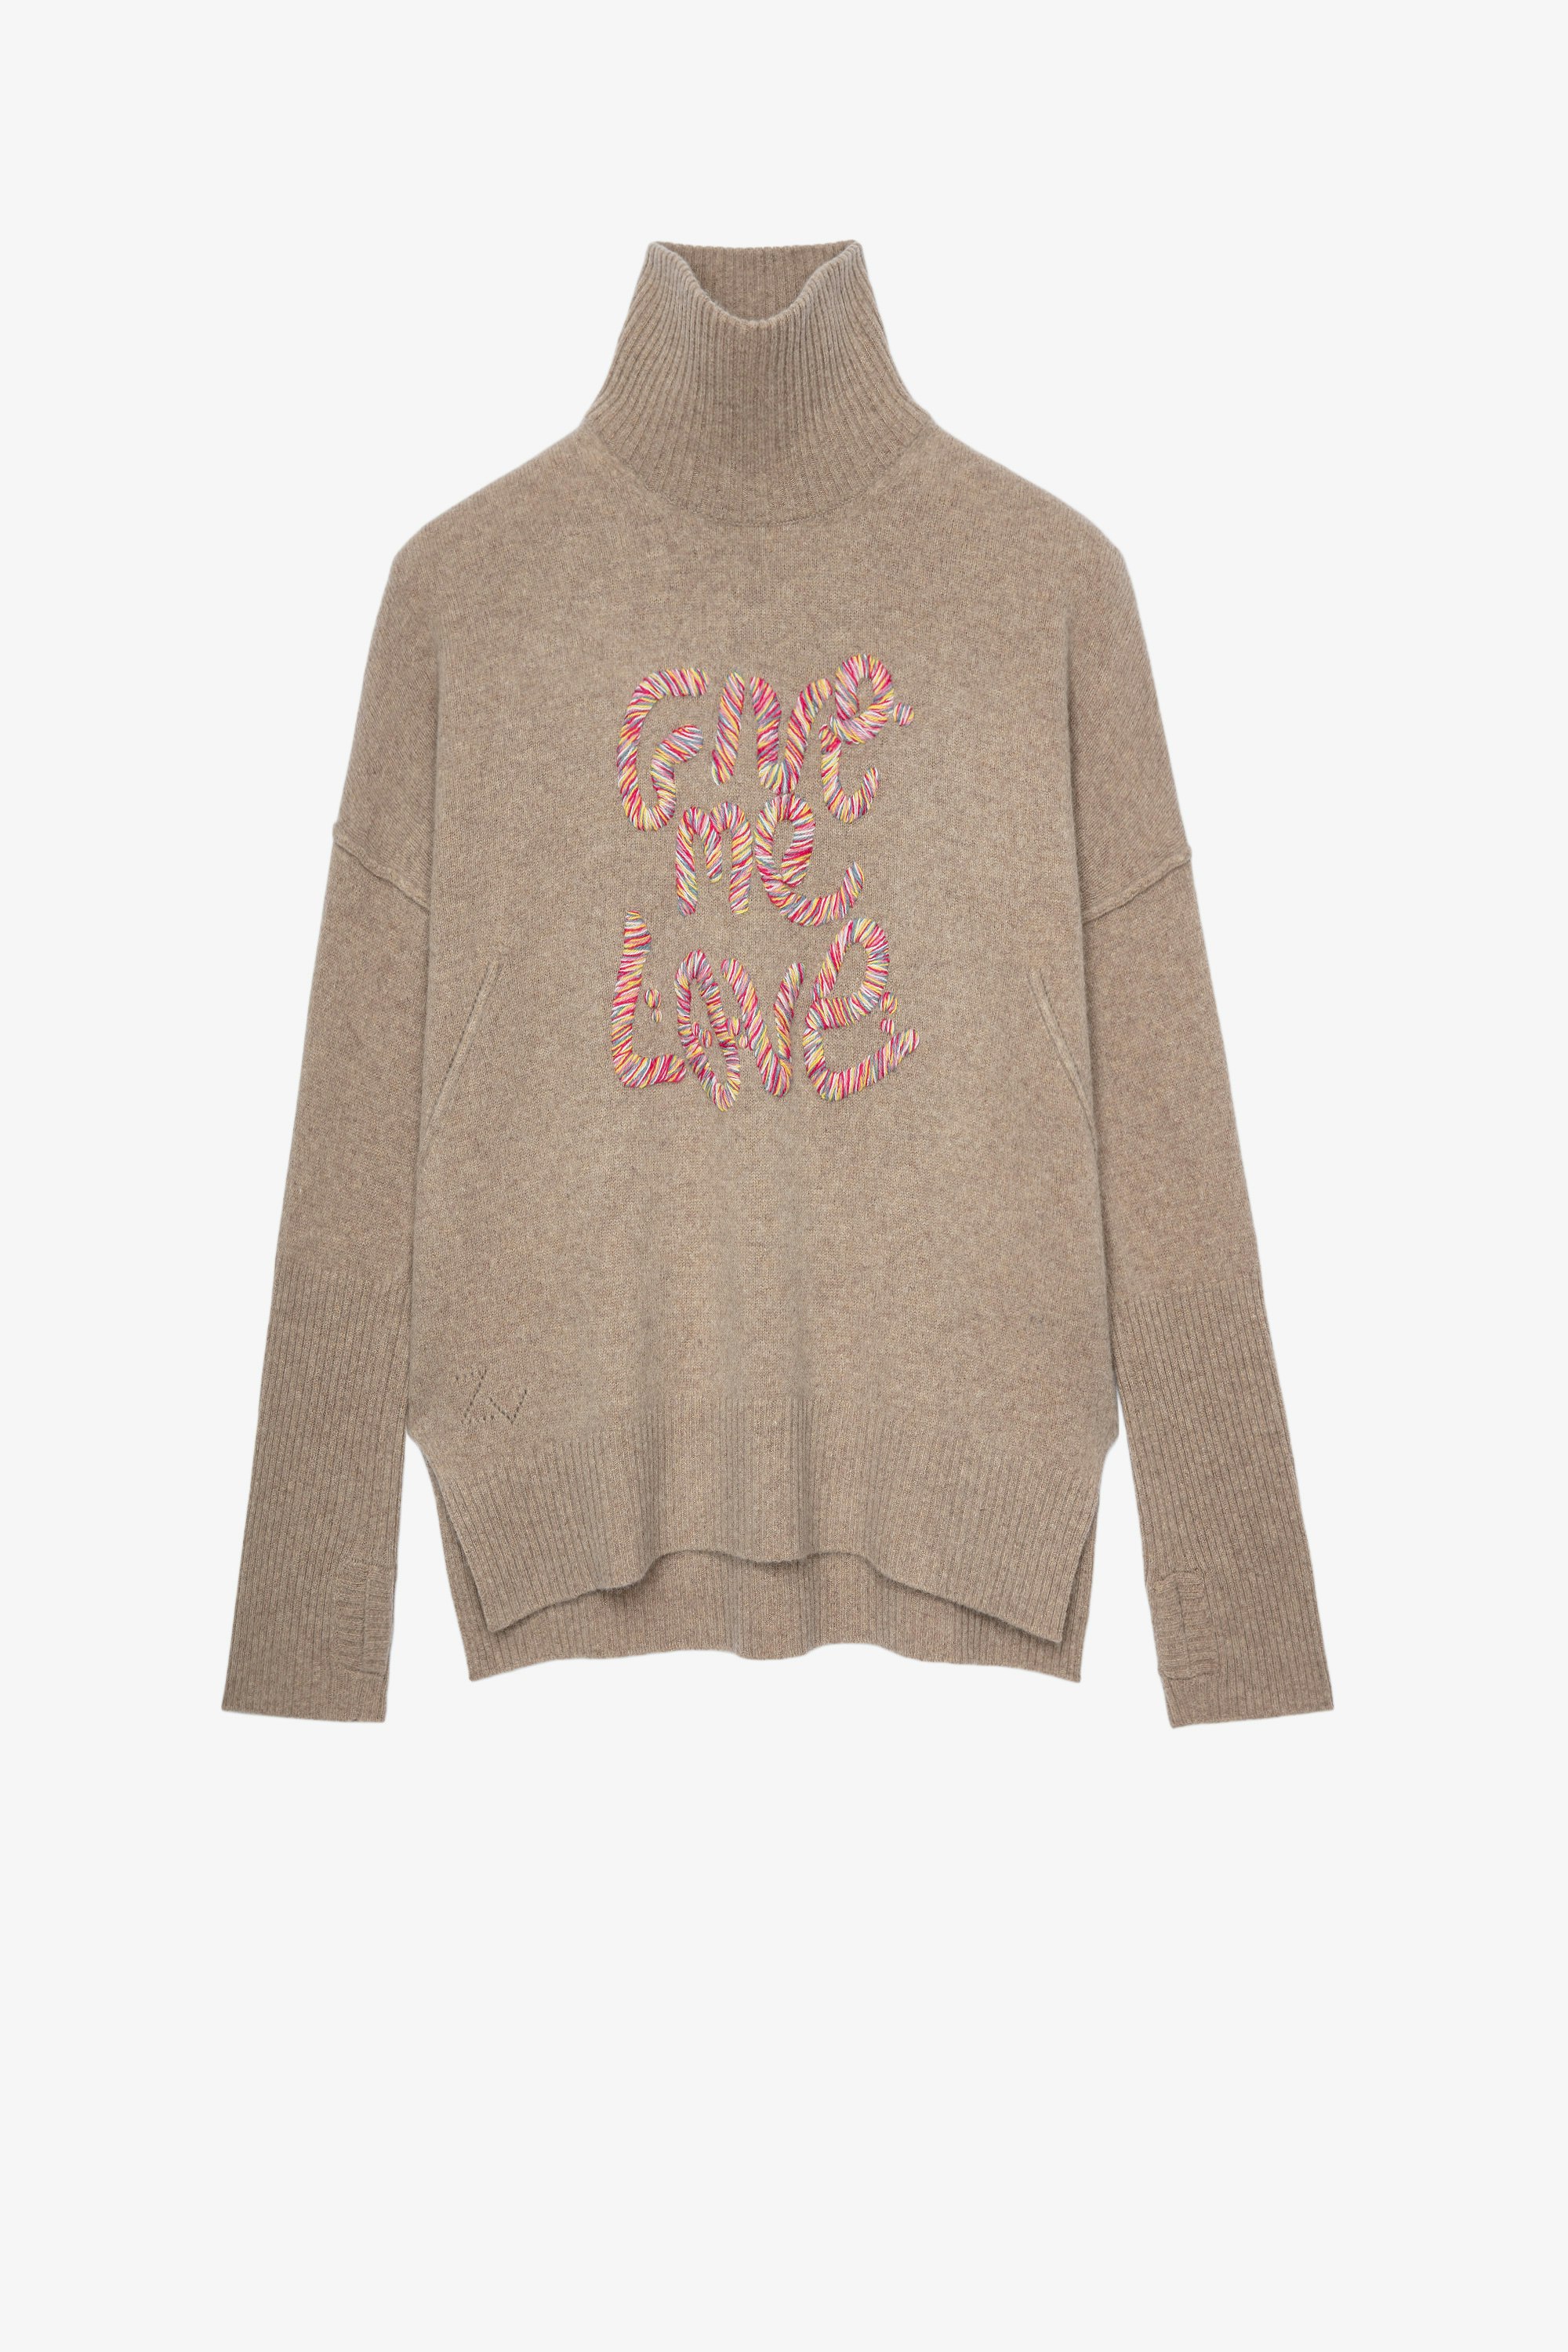 Alma We Give Me Love ニット Beige knit jumper with “Give Me Love” slogan